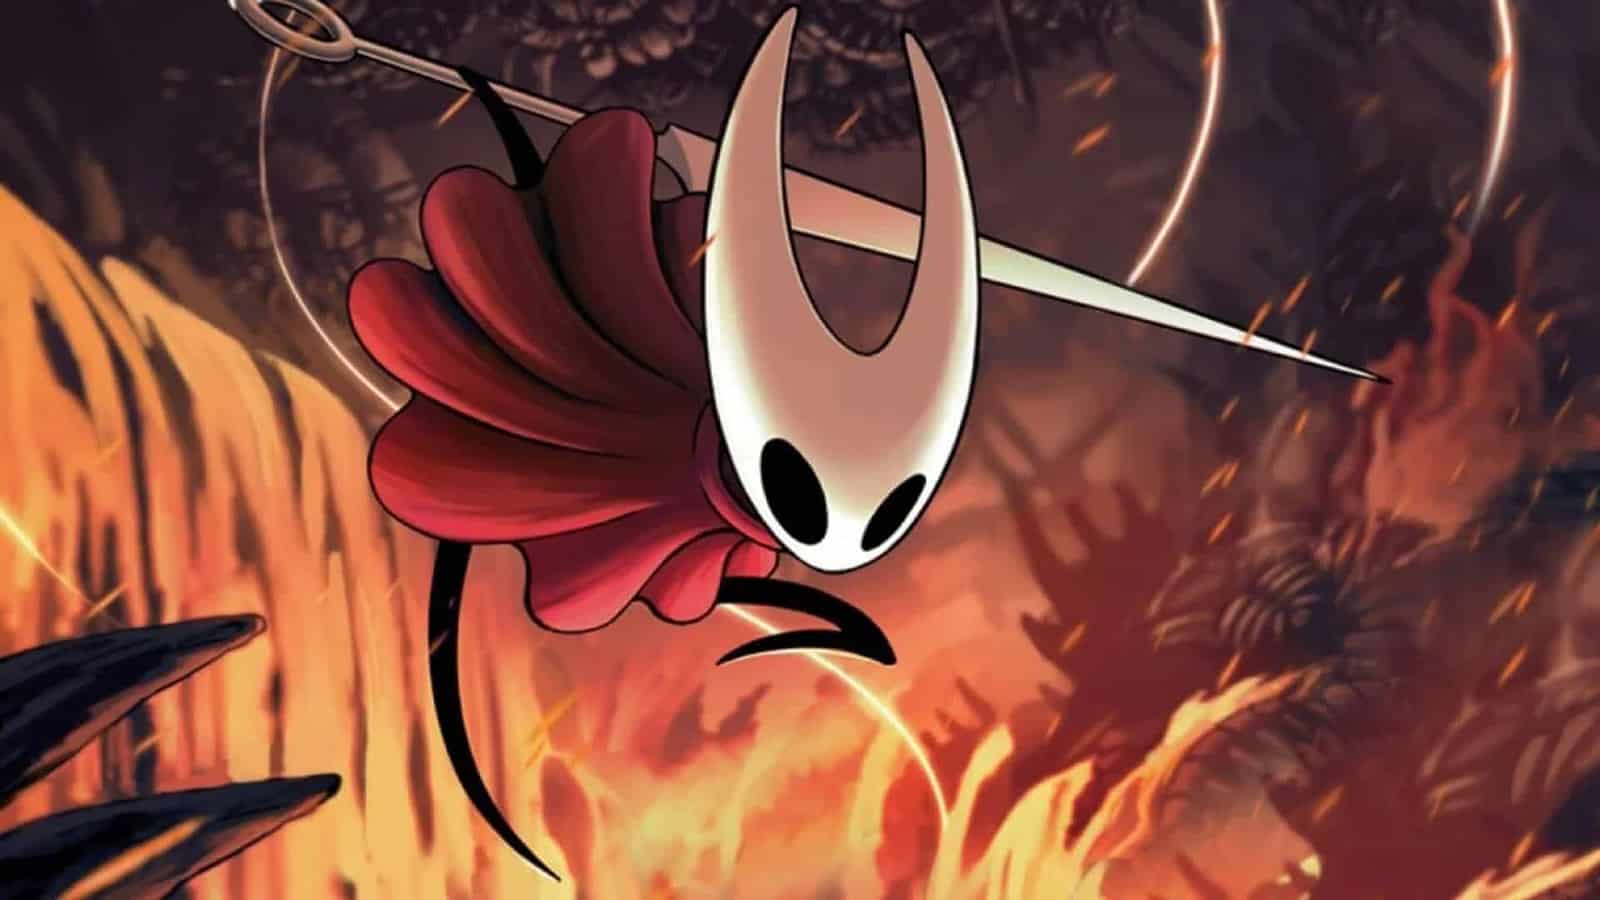 Artwork featuring Hornet, the main character in Hollow Knight Silksong